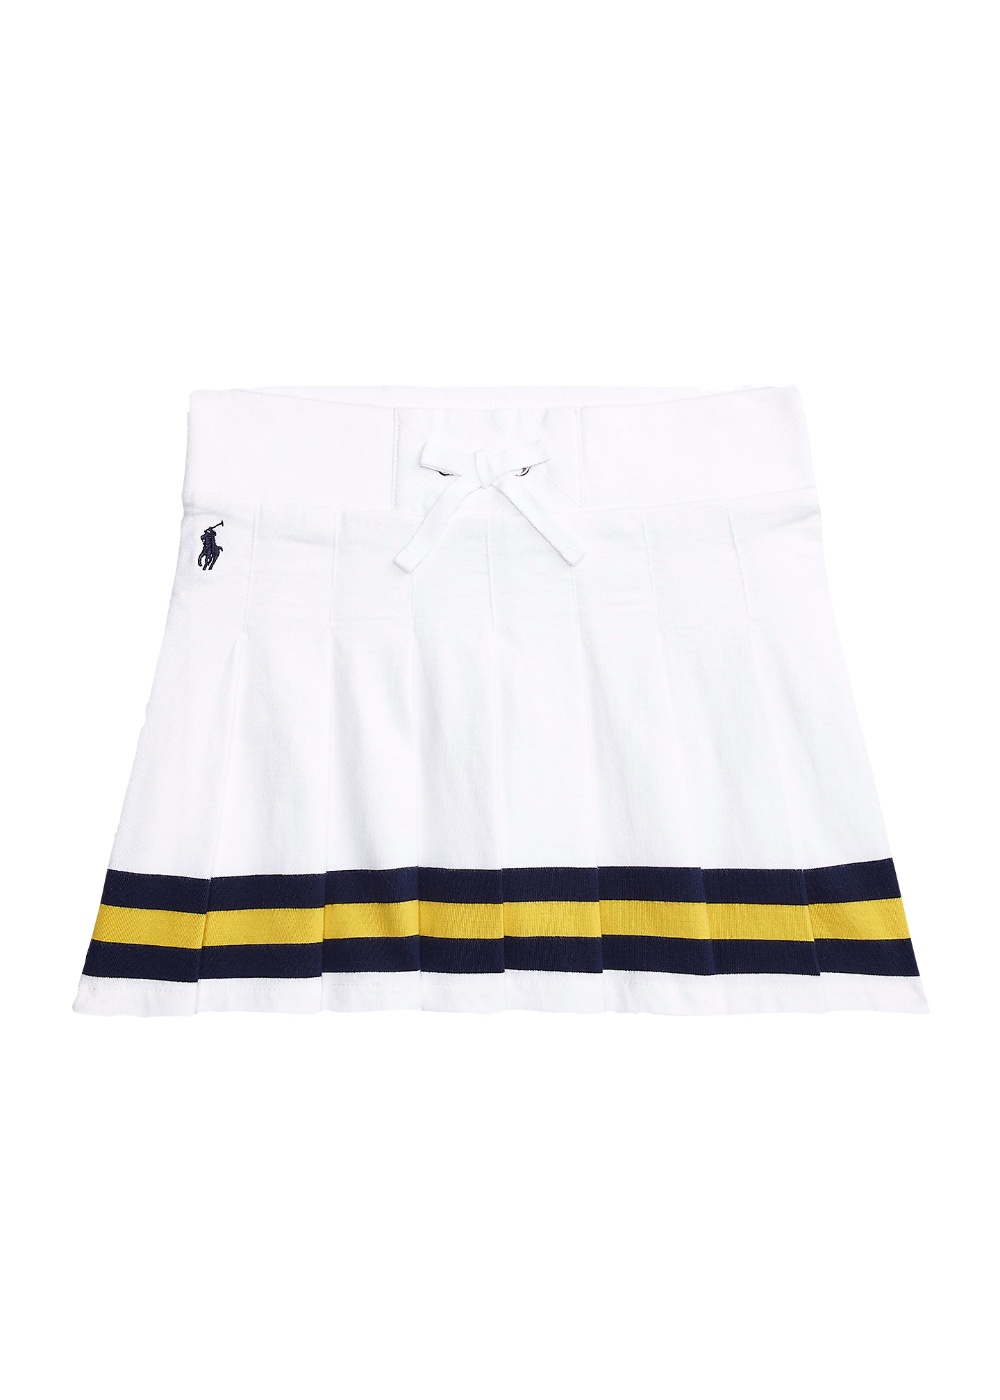 Featured image for “Polo Ralph Lauren Skort a pieghe”